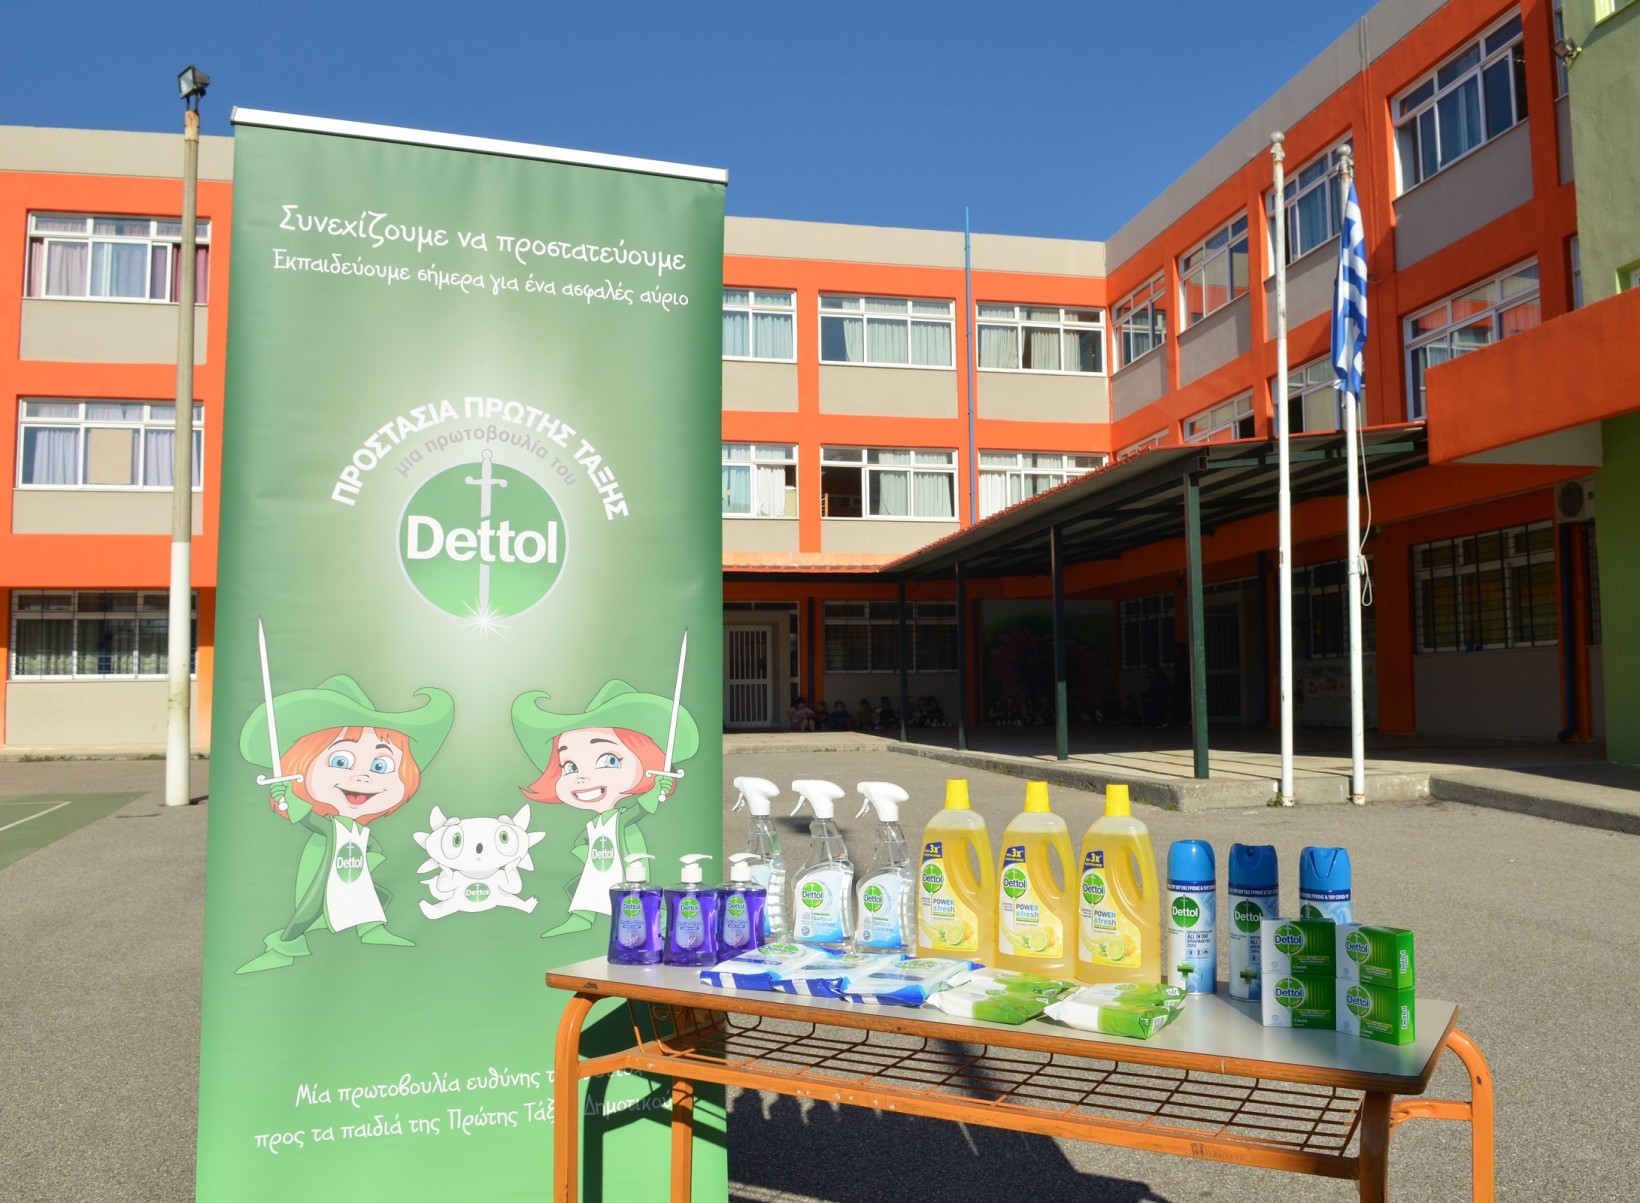 02.Dettol Product Donation Ceremony